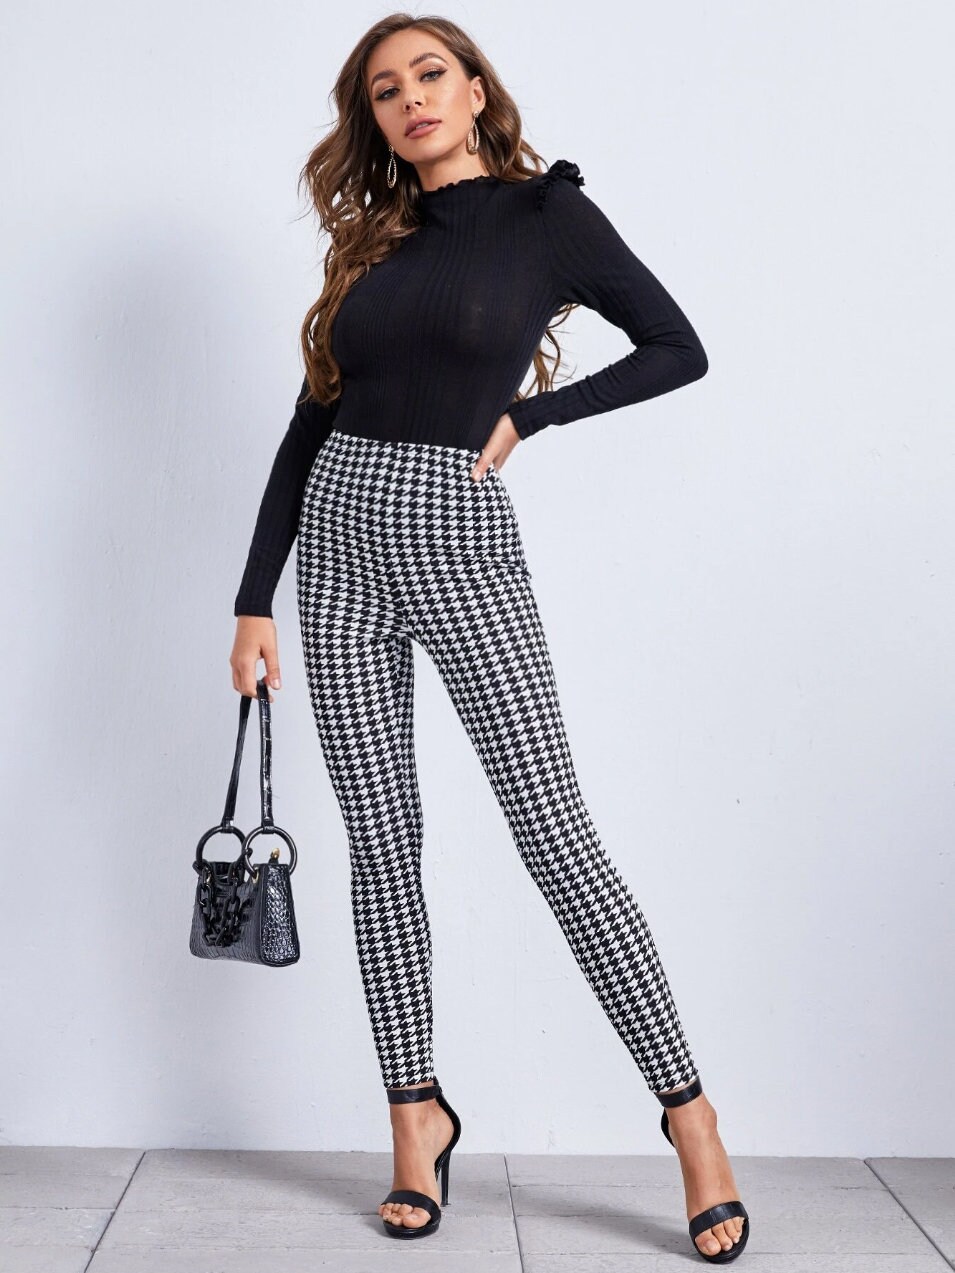 Black and White High Waist Houndstooth Print Leggings Casual Slight Stretch Fit